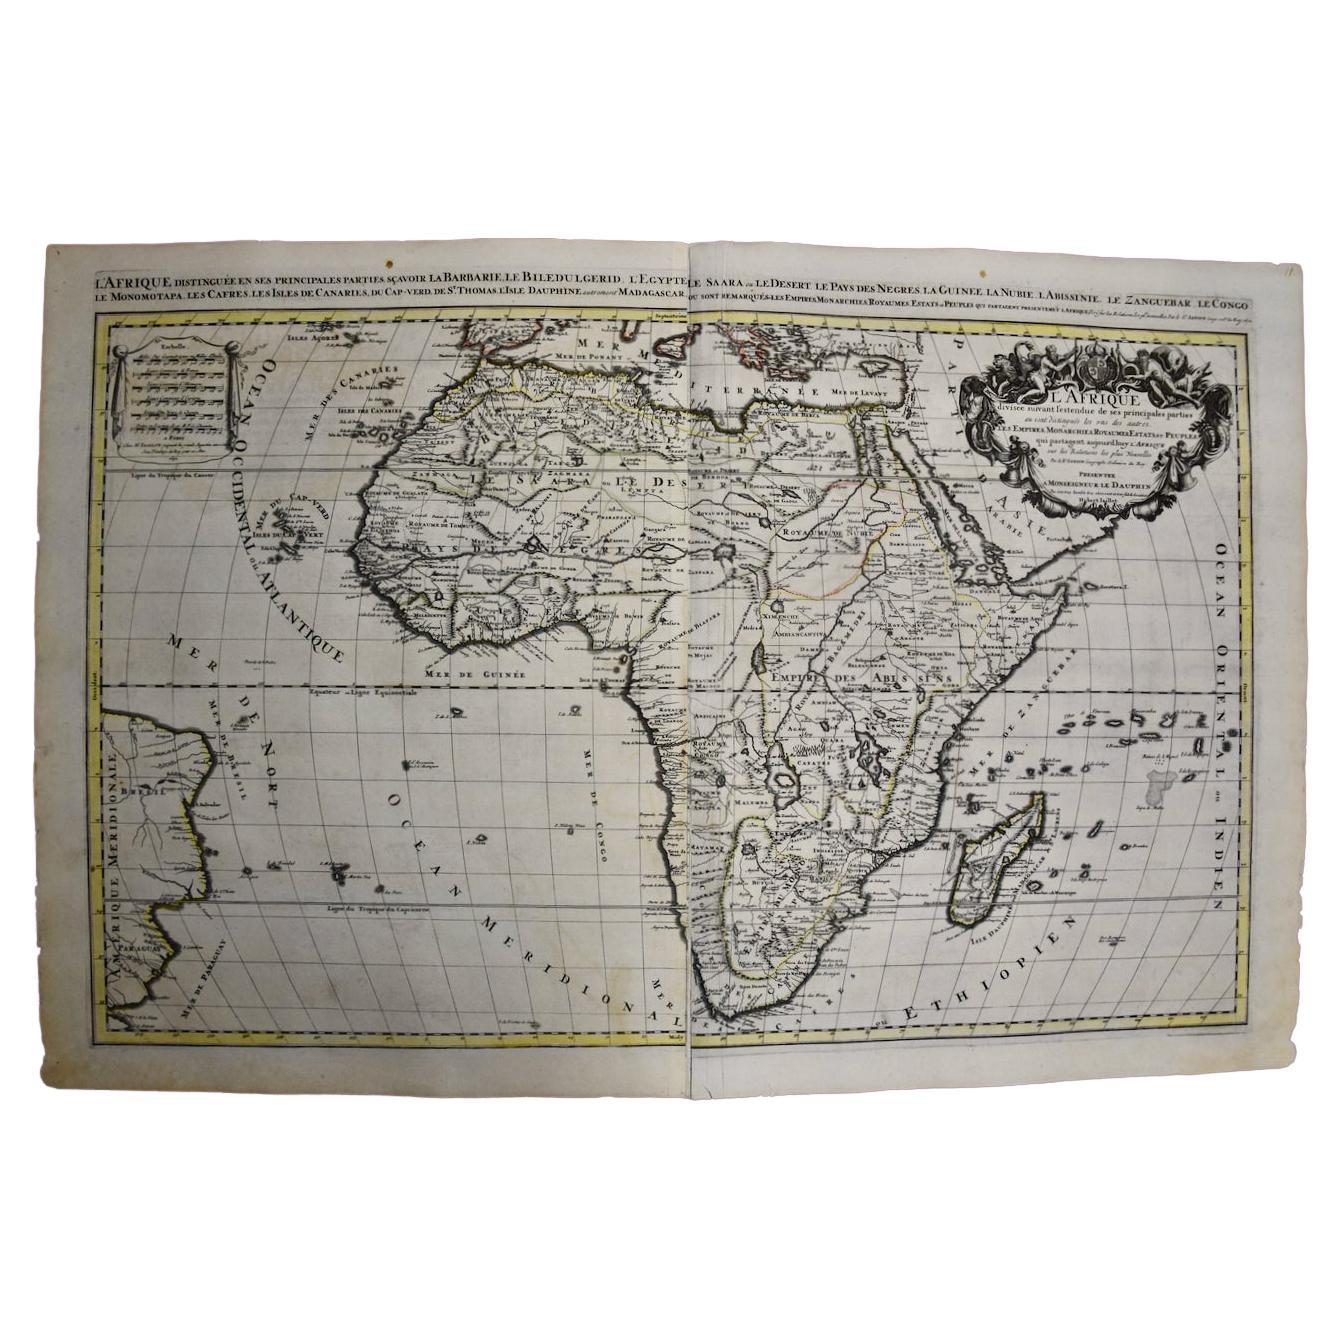 Africa: A Large 17th Century Hand-Colored Map by Sanson and Jaillot